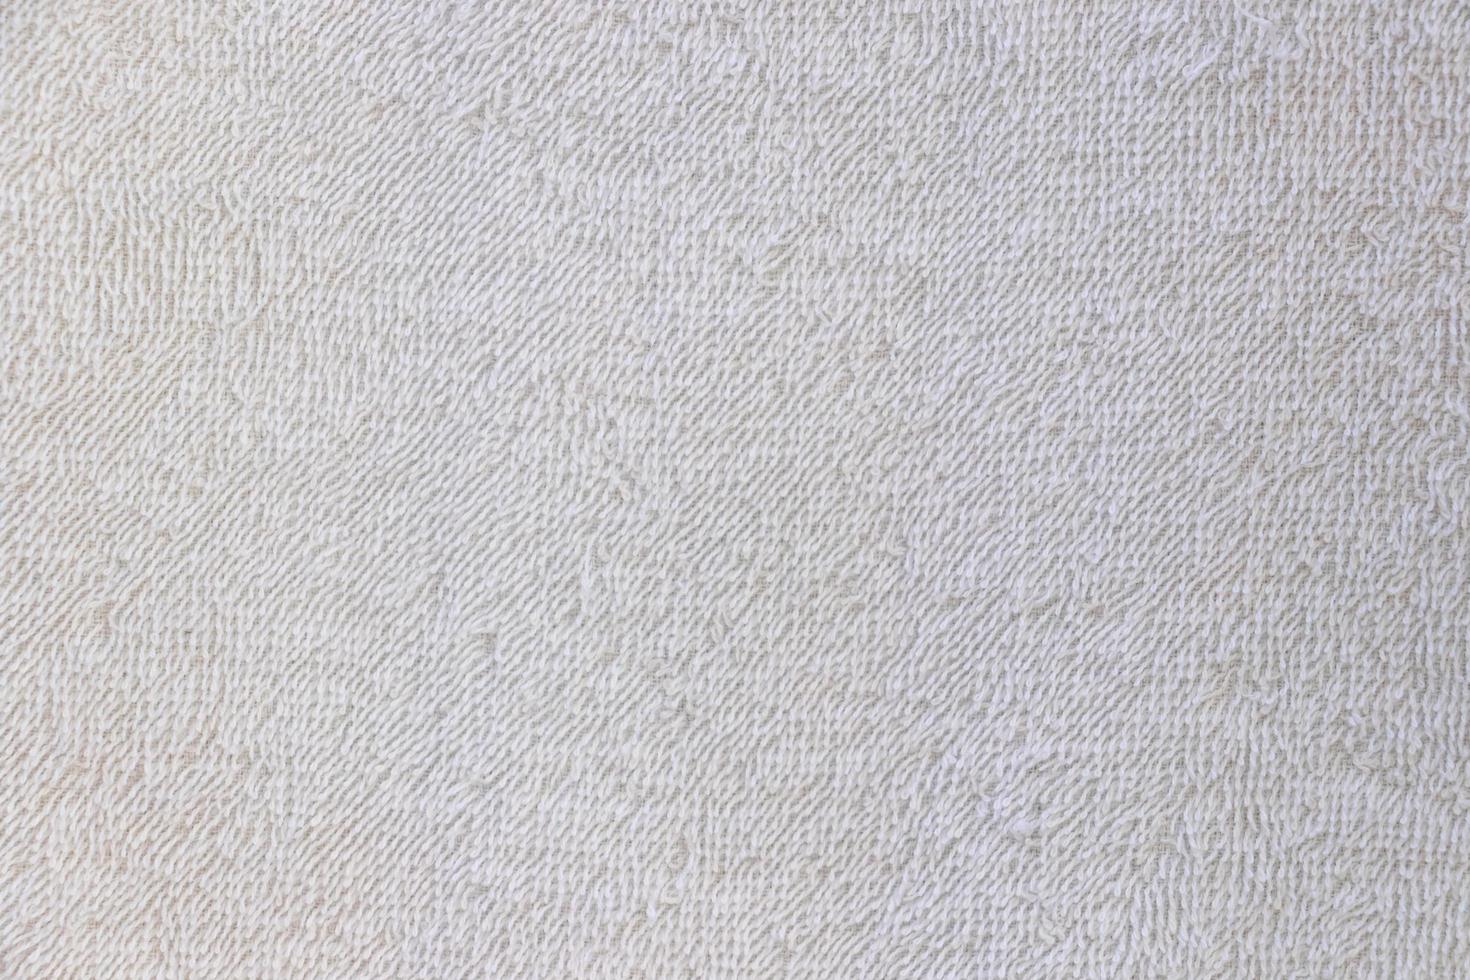 white towel close-up fabric and texture background. photo